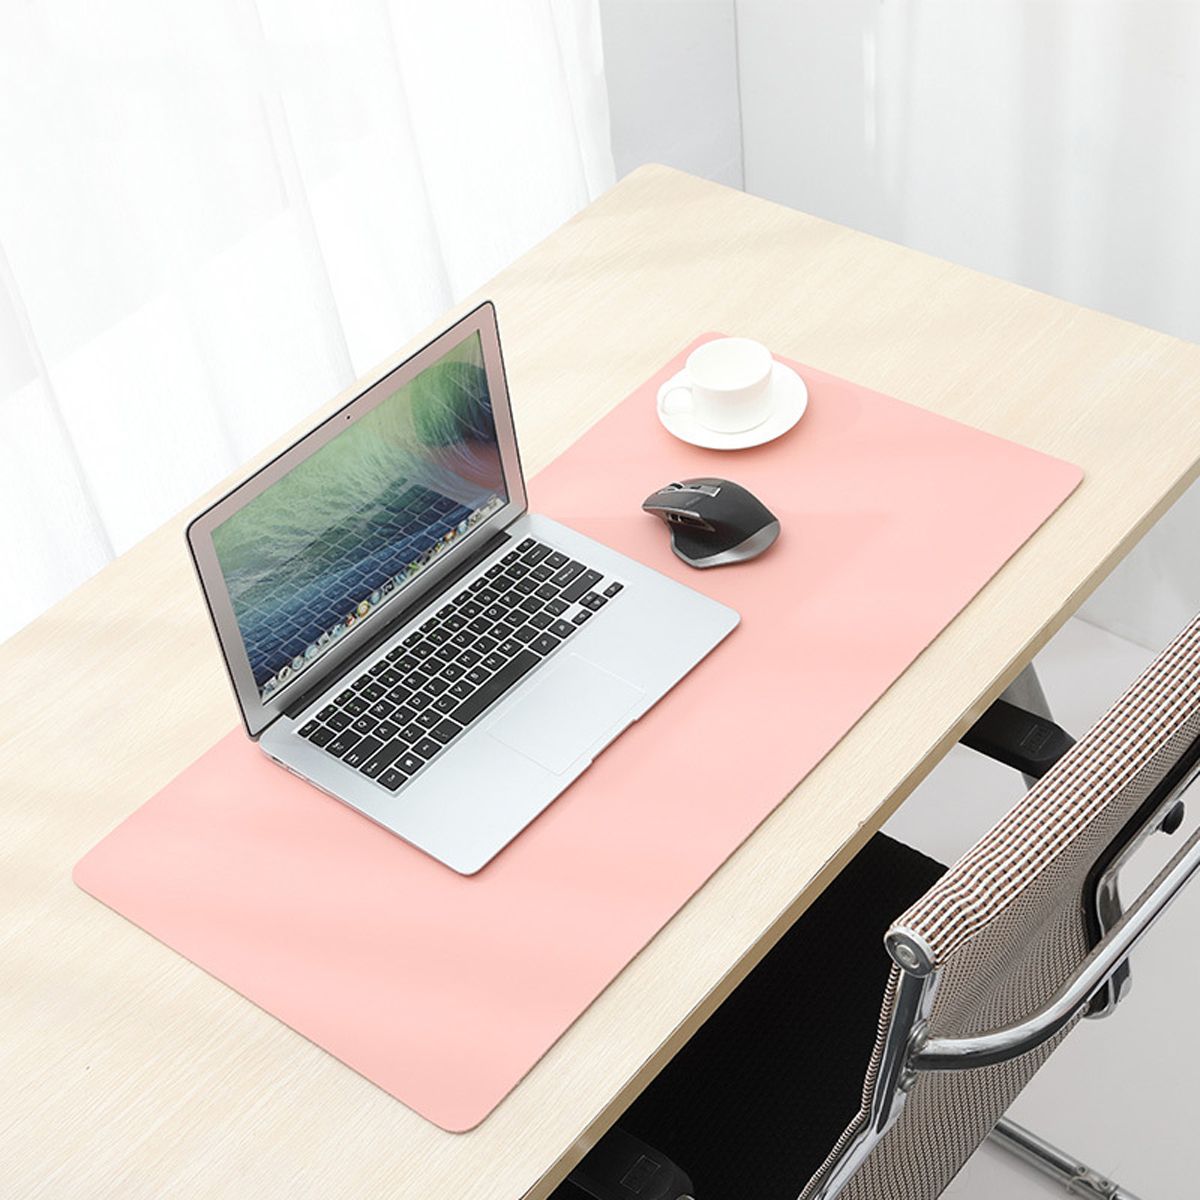 Waterproof-Mouse-Pad-Small-Office-Gaming-Desk-Mat-Single-Side-PU-Leather-Multifunctional-PVC-Pad-for-1749994